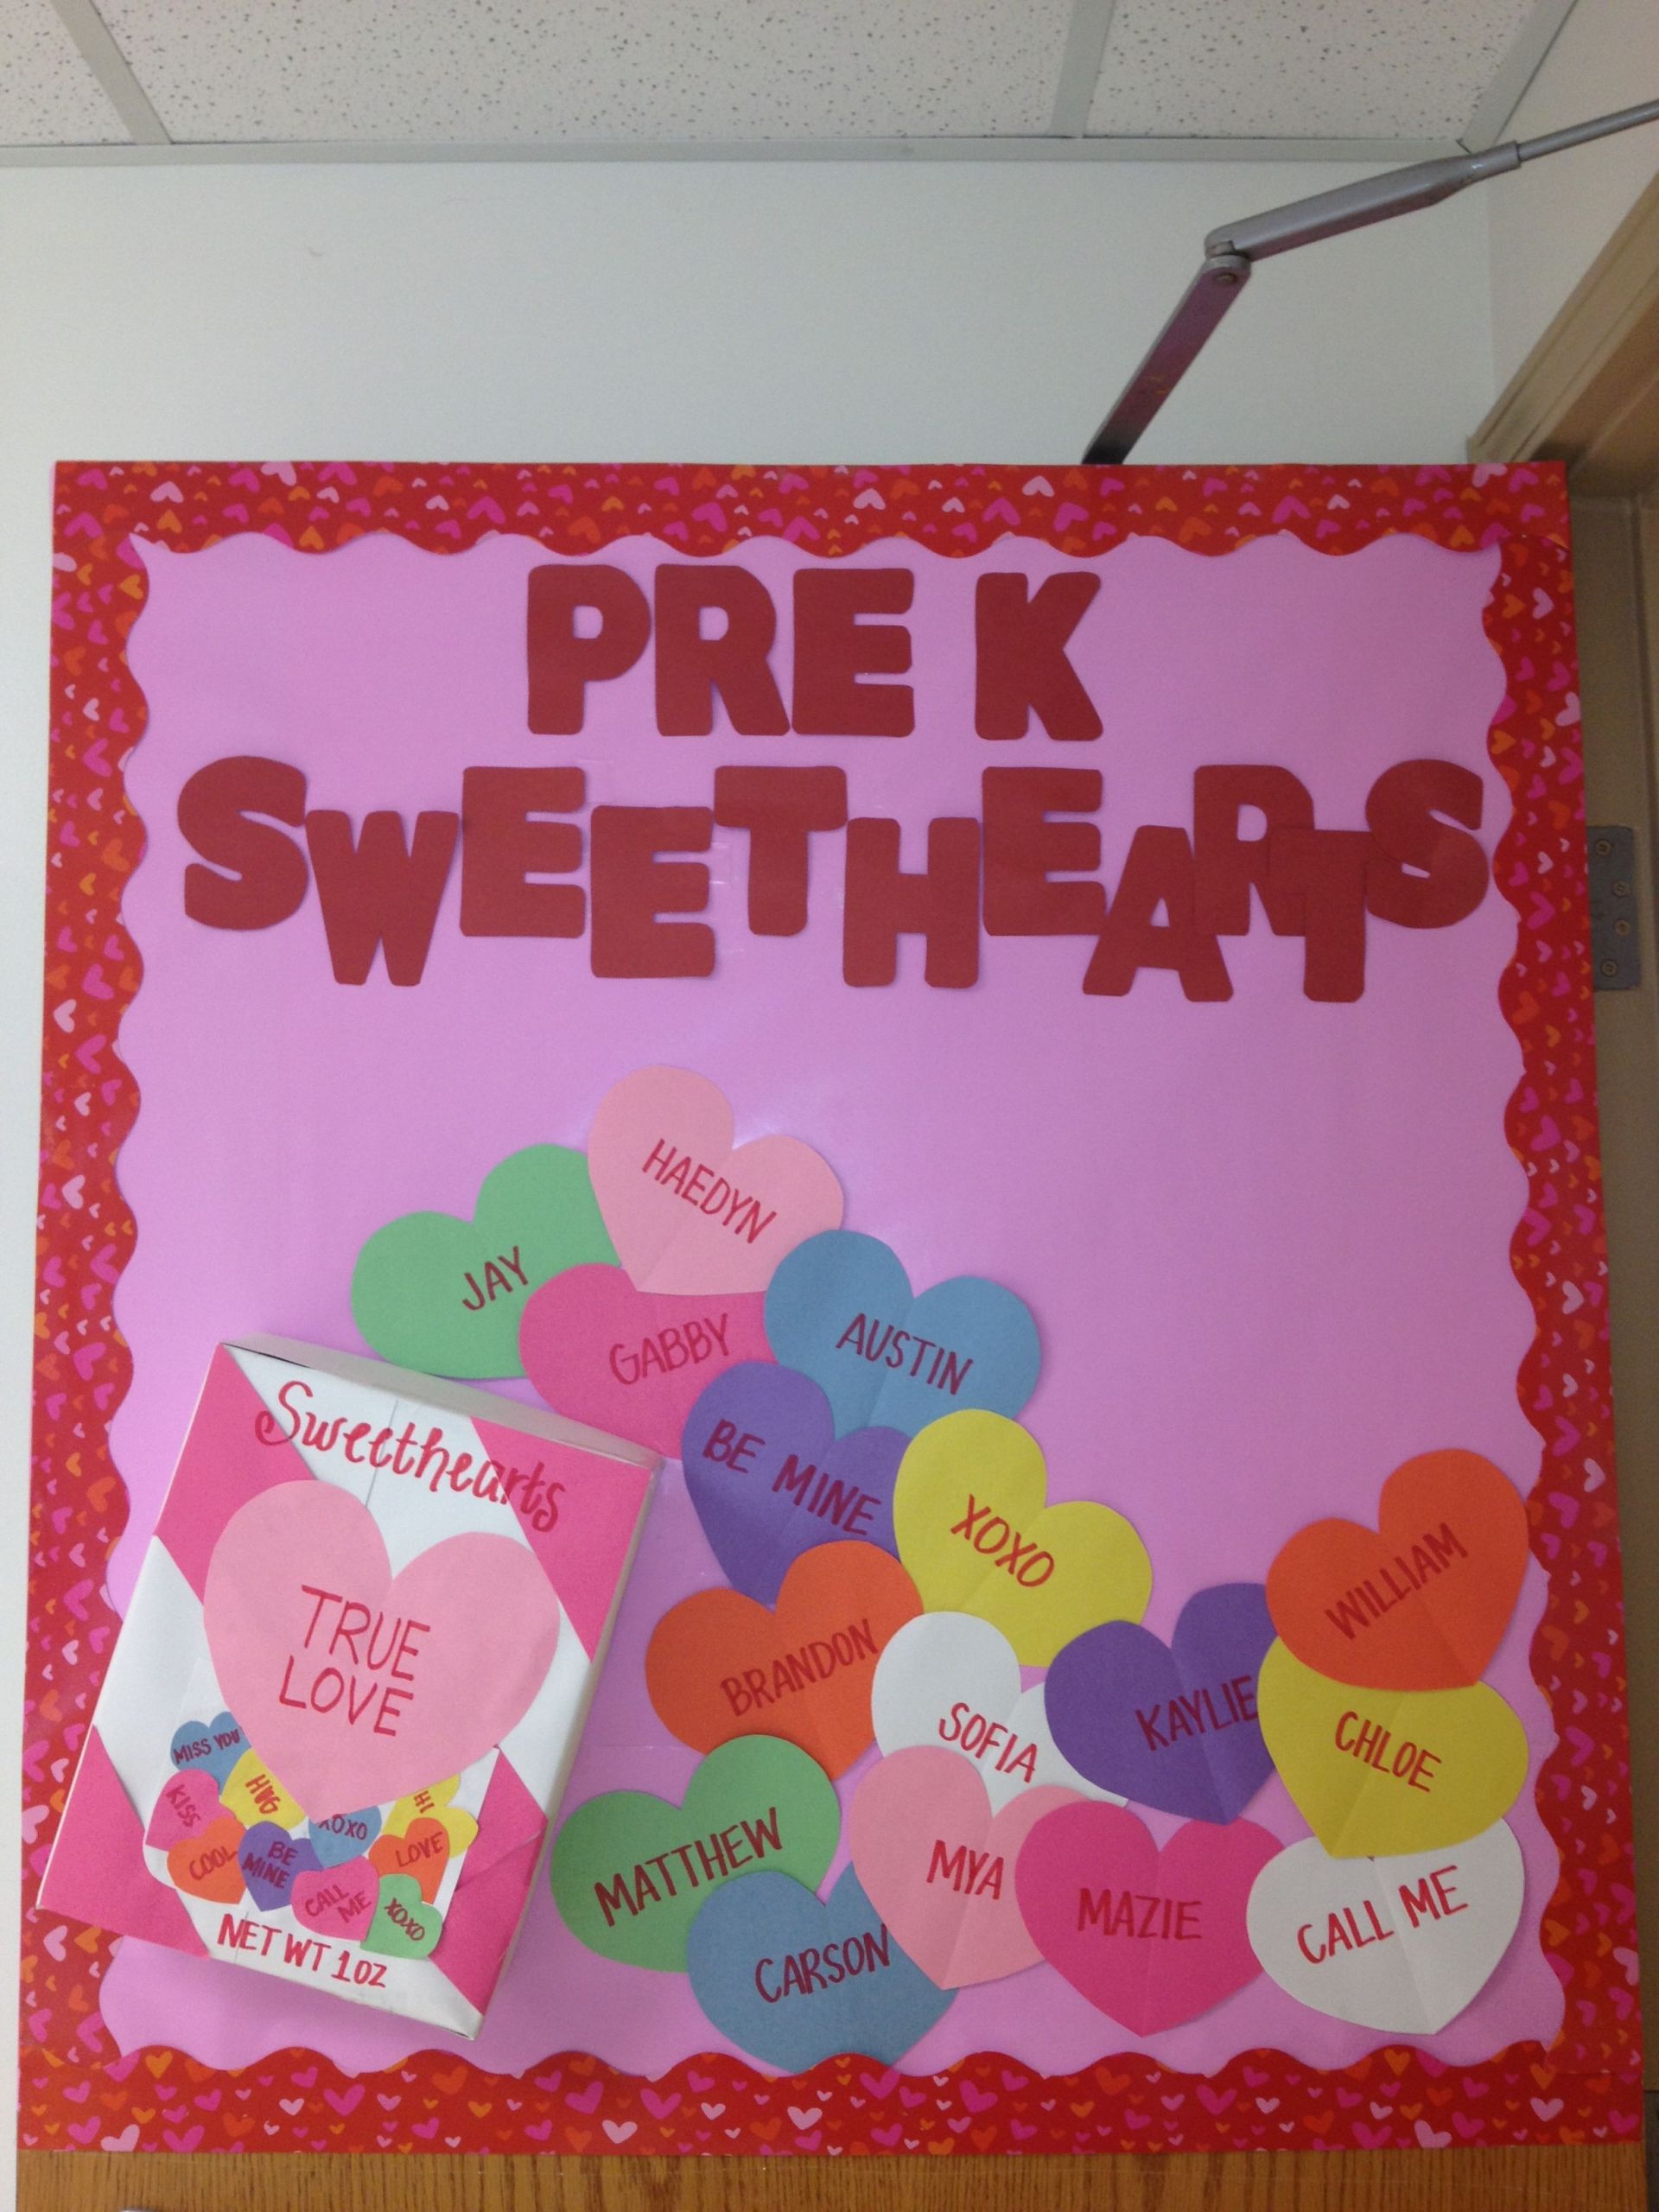 Valentines Day Bulletin Board Ideas for Preschool Awesome Valentines Day Bulletin Board Ideas